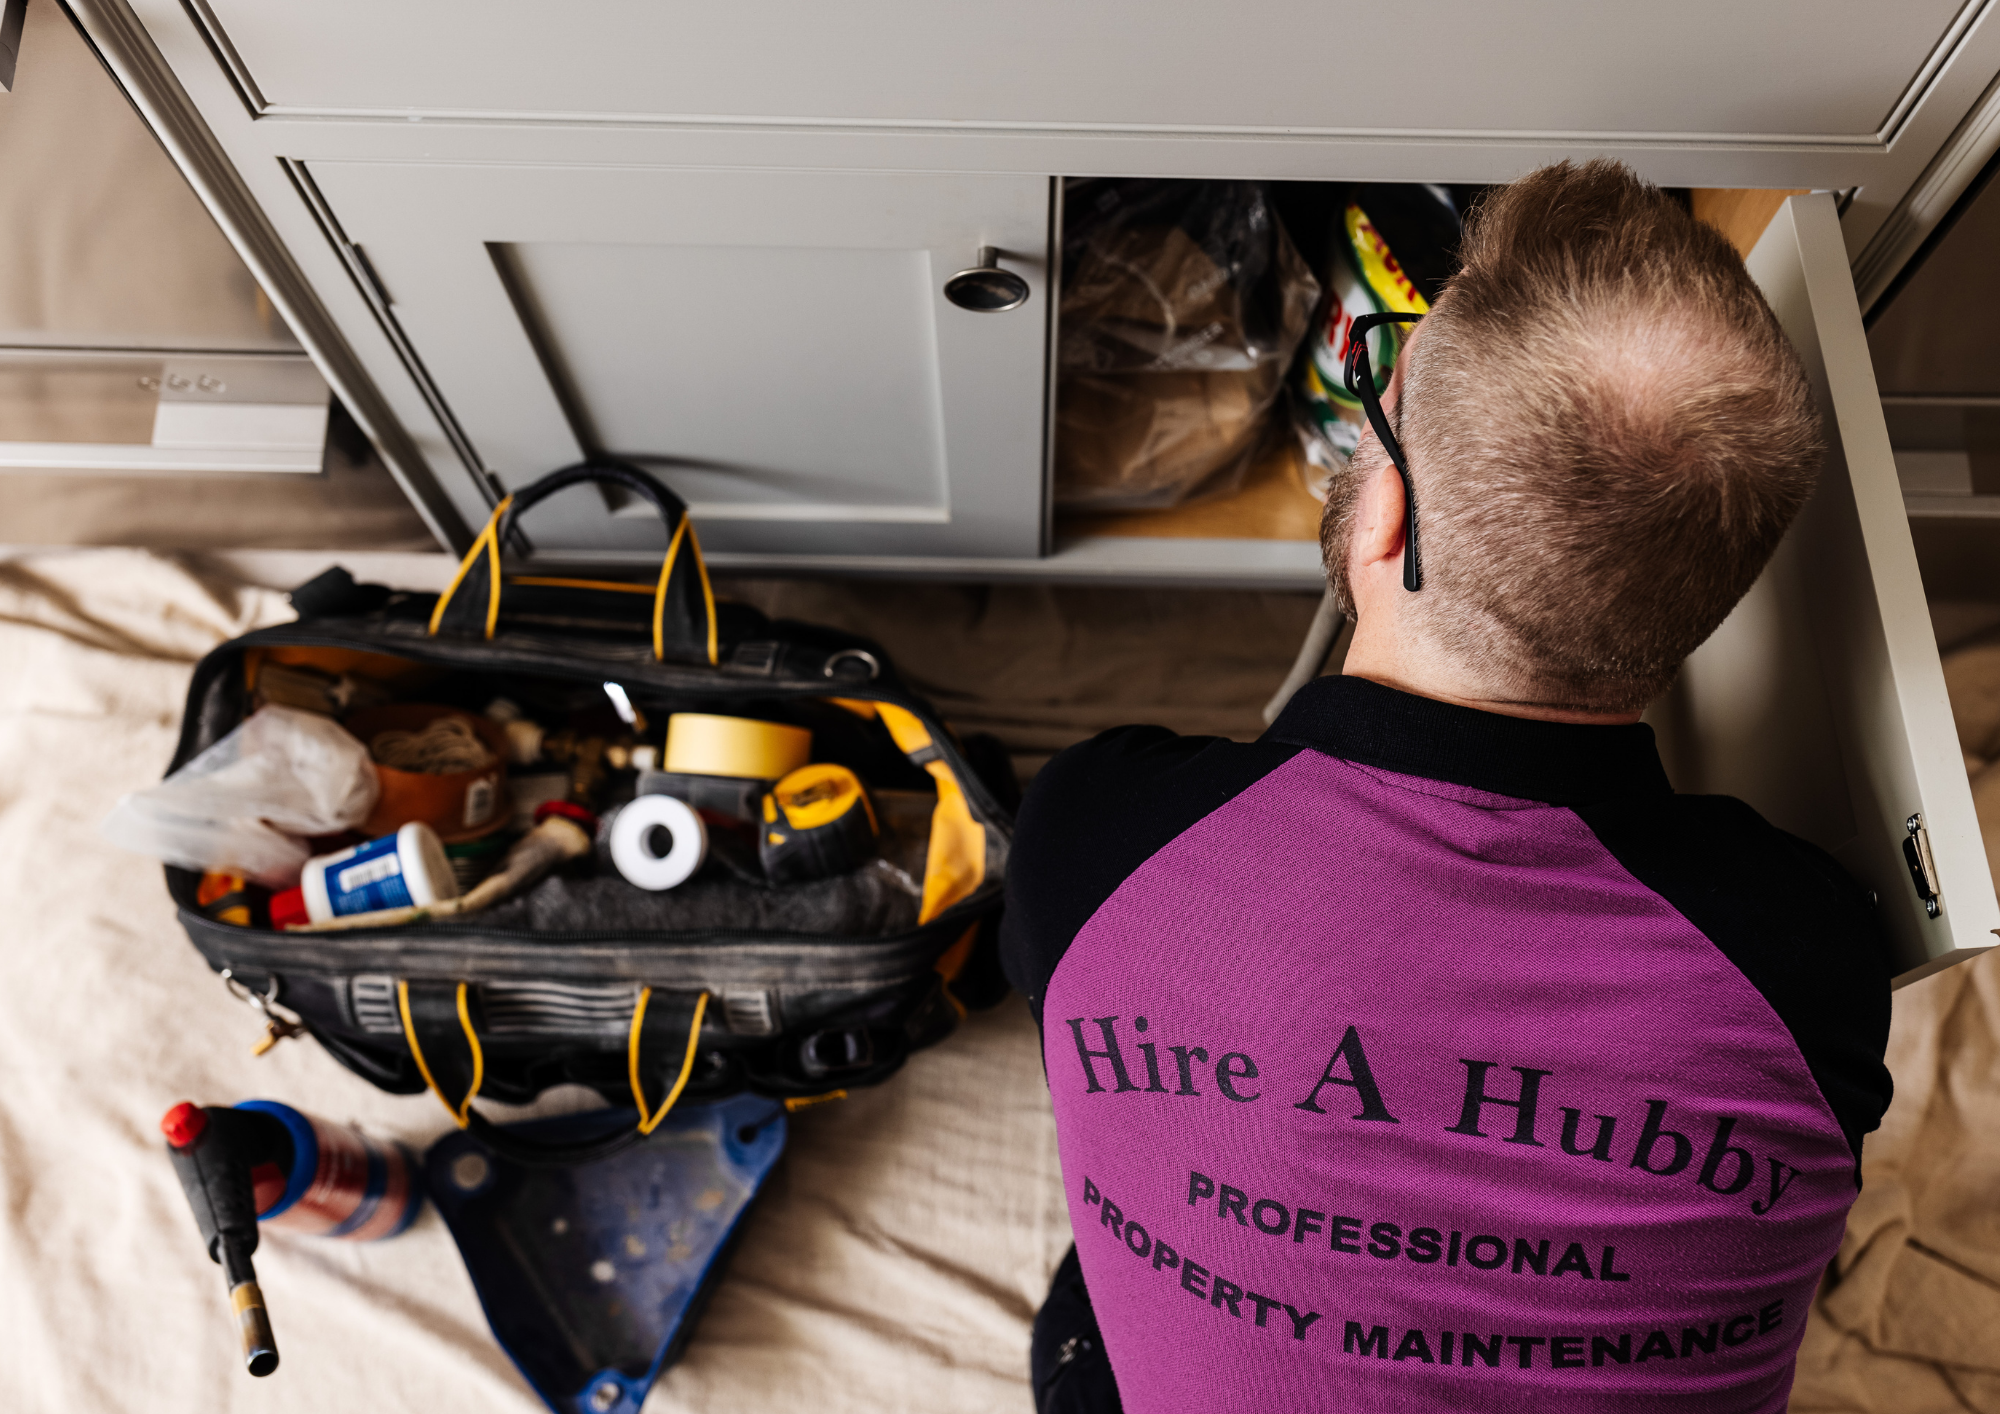 Plumbing issues? Just call Hire A Hubby!